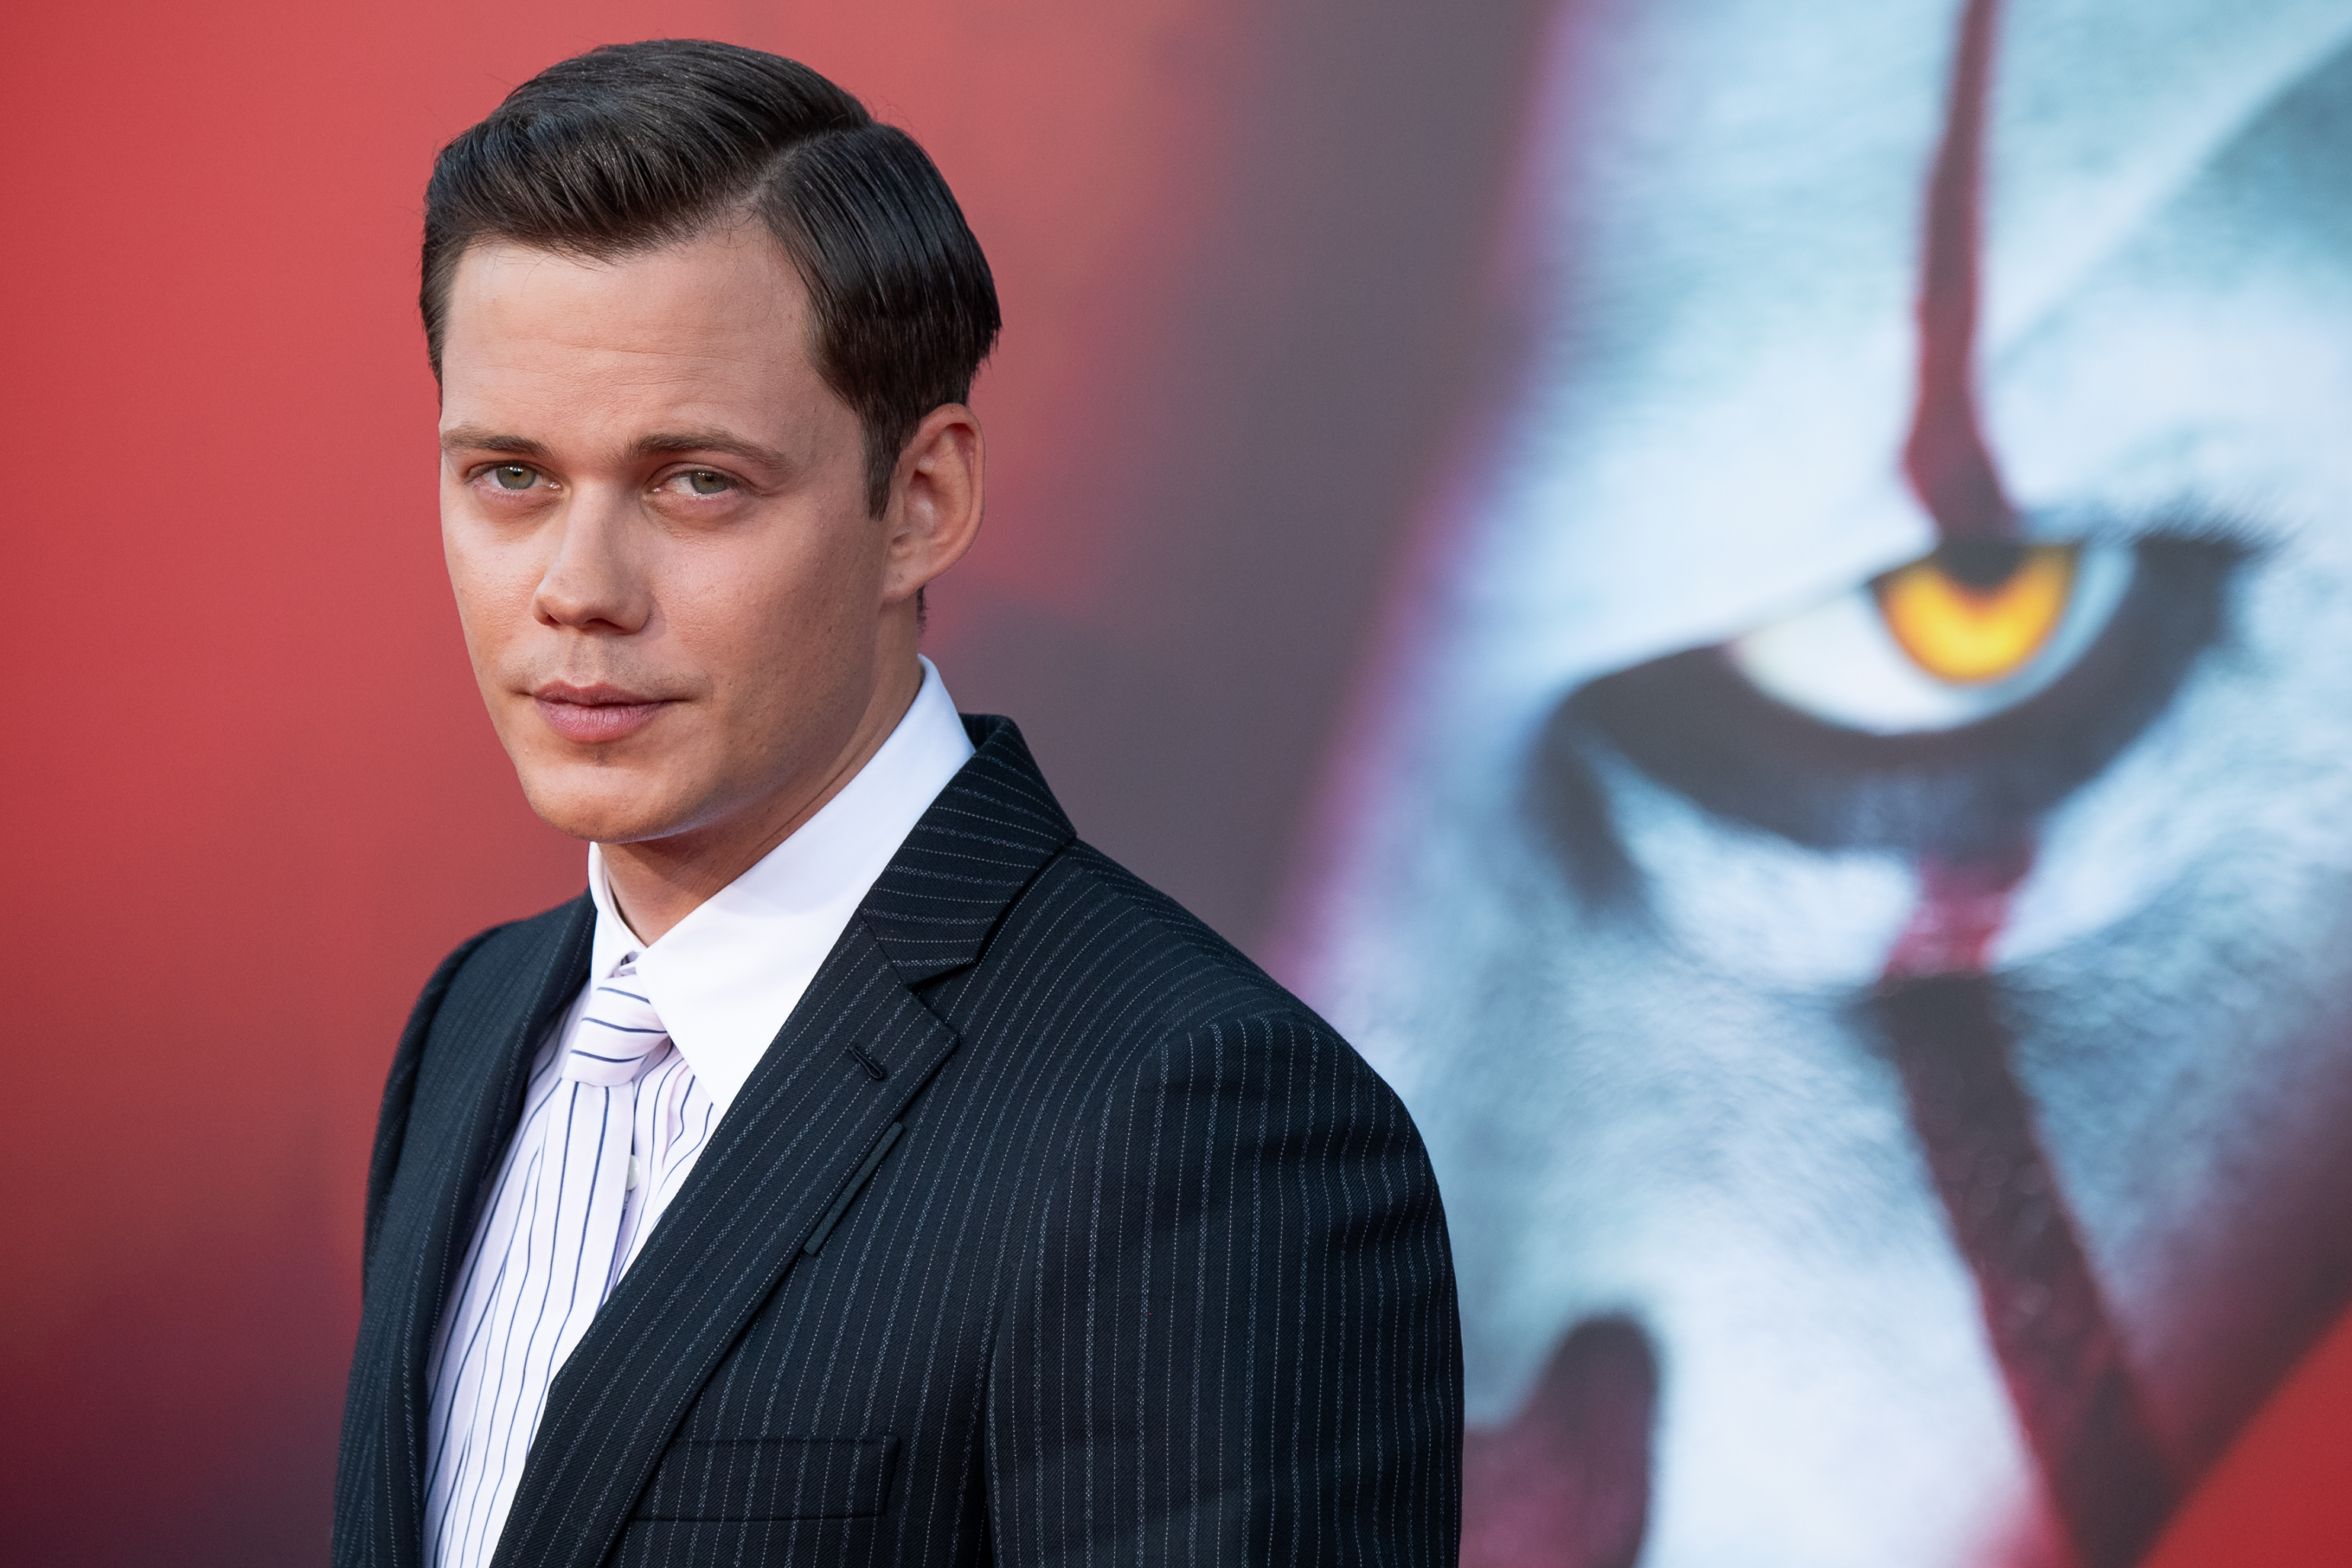 Bill Skarsgard at the 'It: Chapter Two' premiere